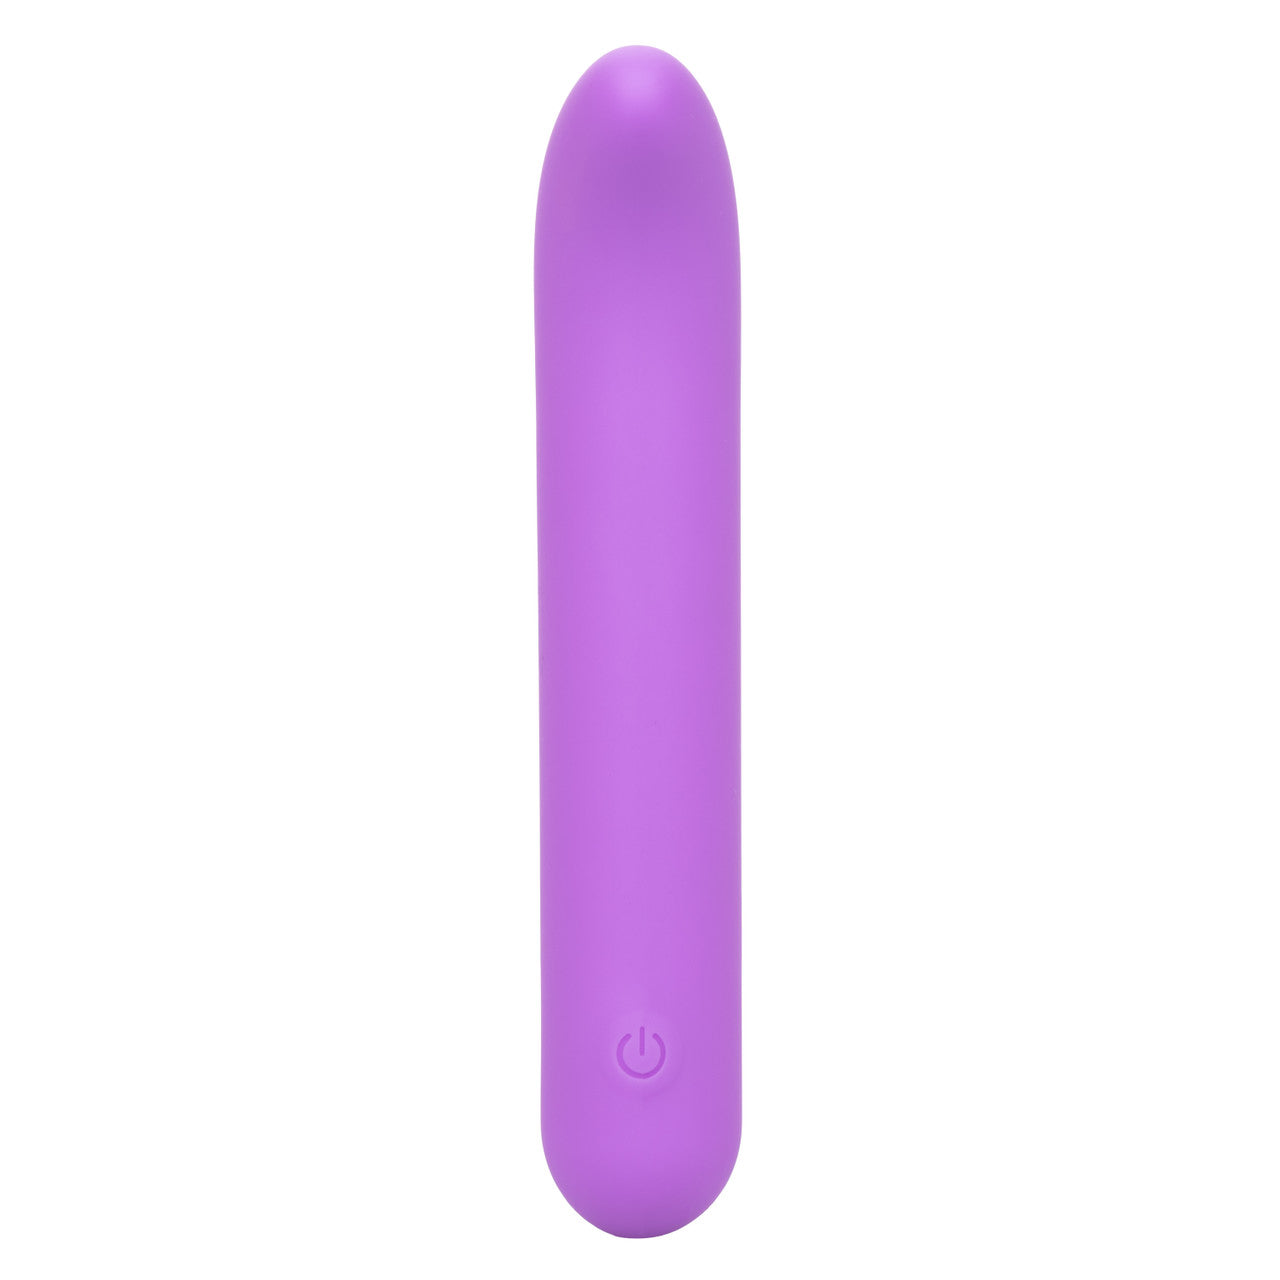 Fuscia mini vibrator with curved tip for g-spot stimulation and single power control button at the bottom. Great for self-love.